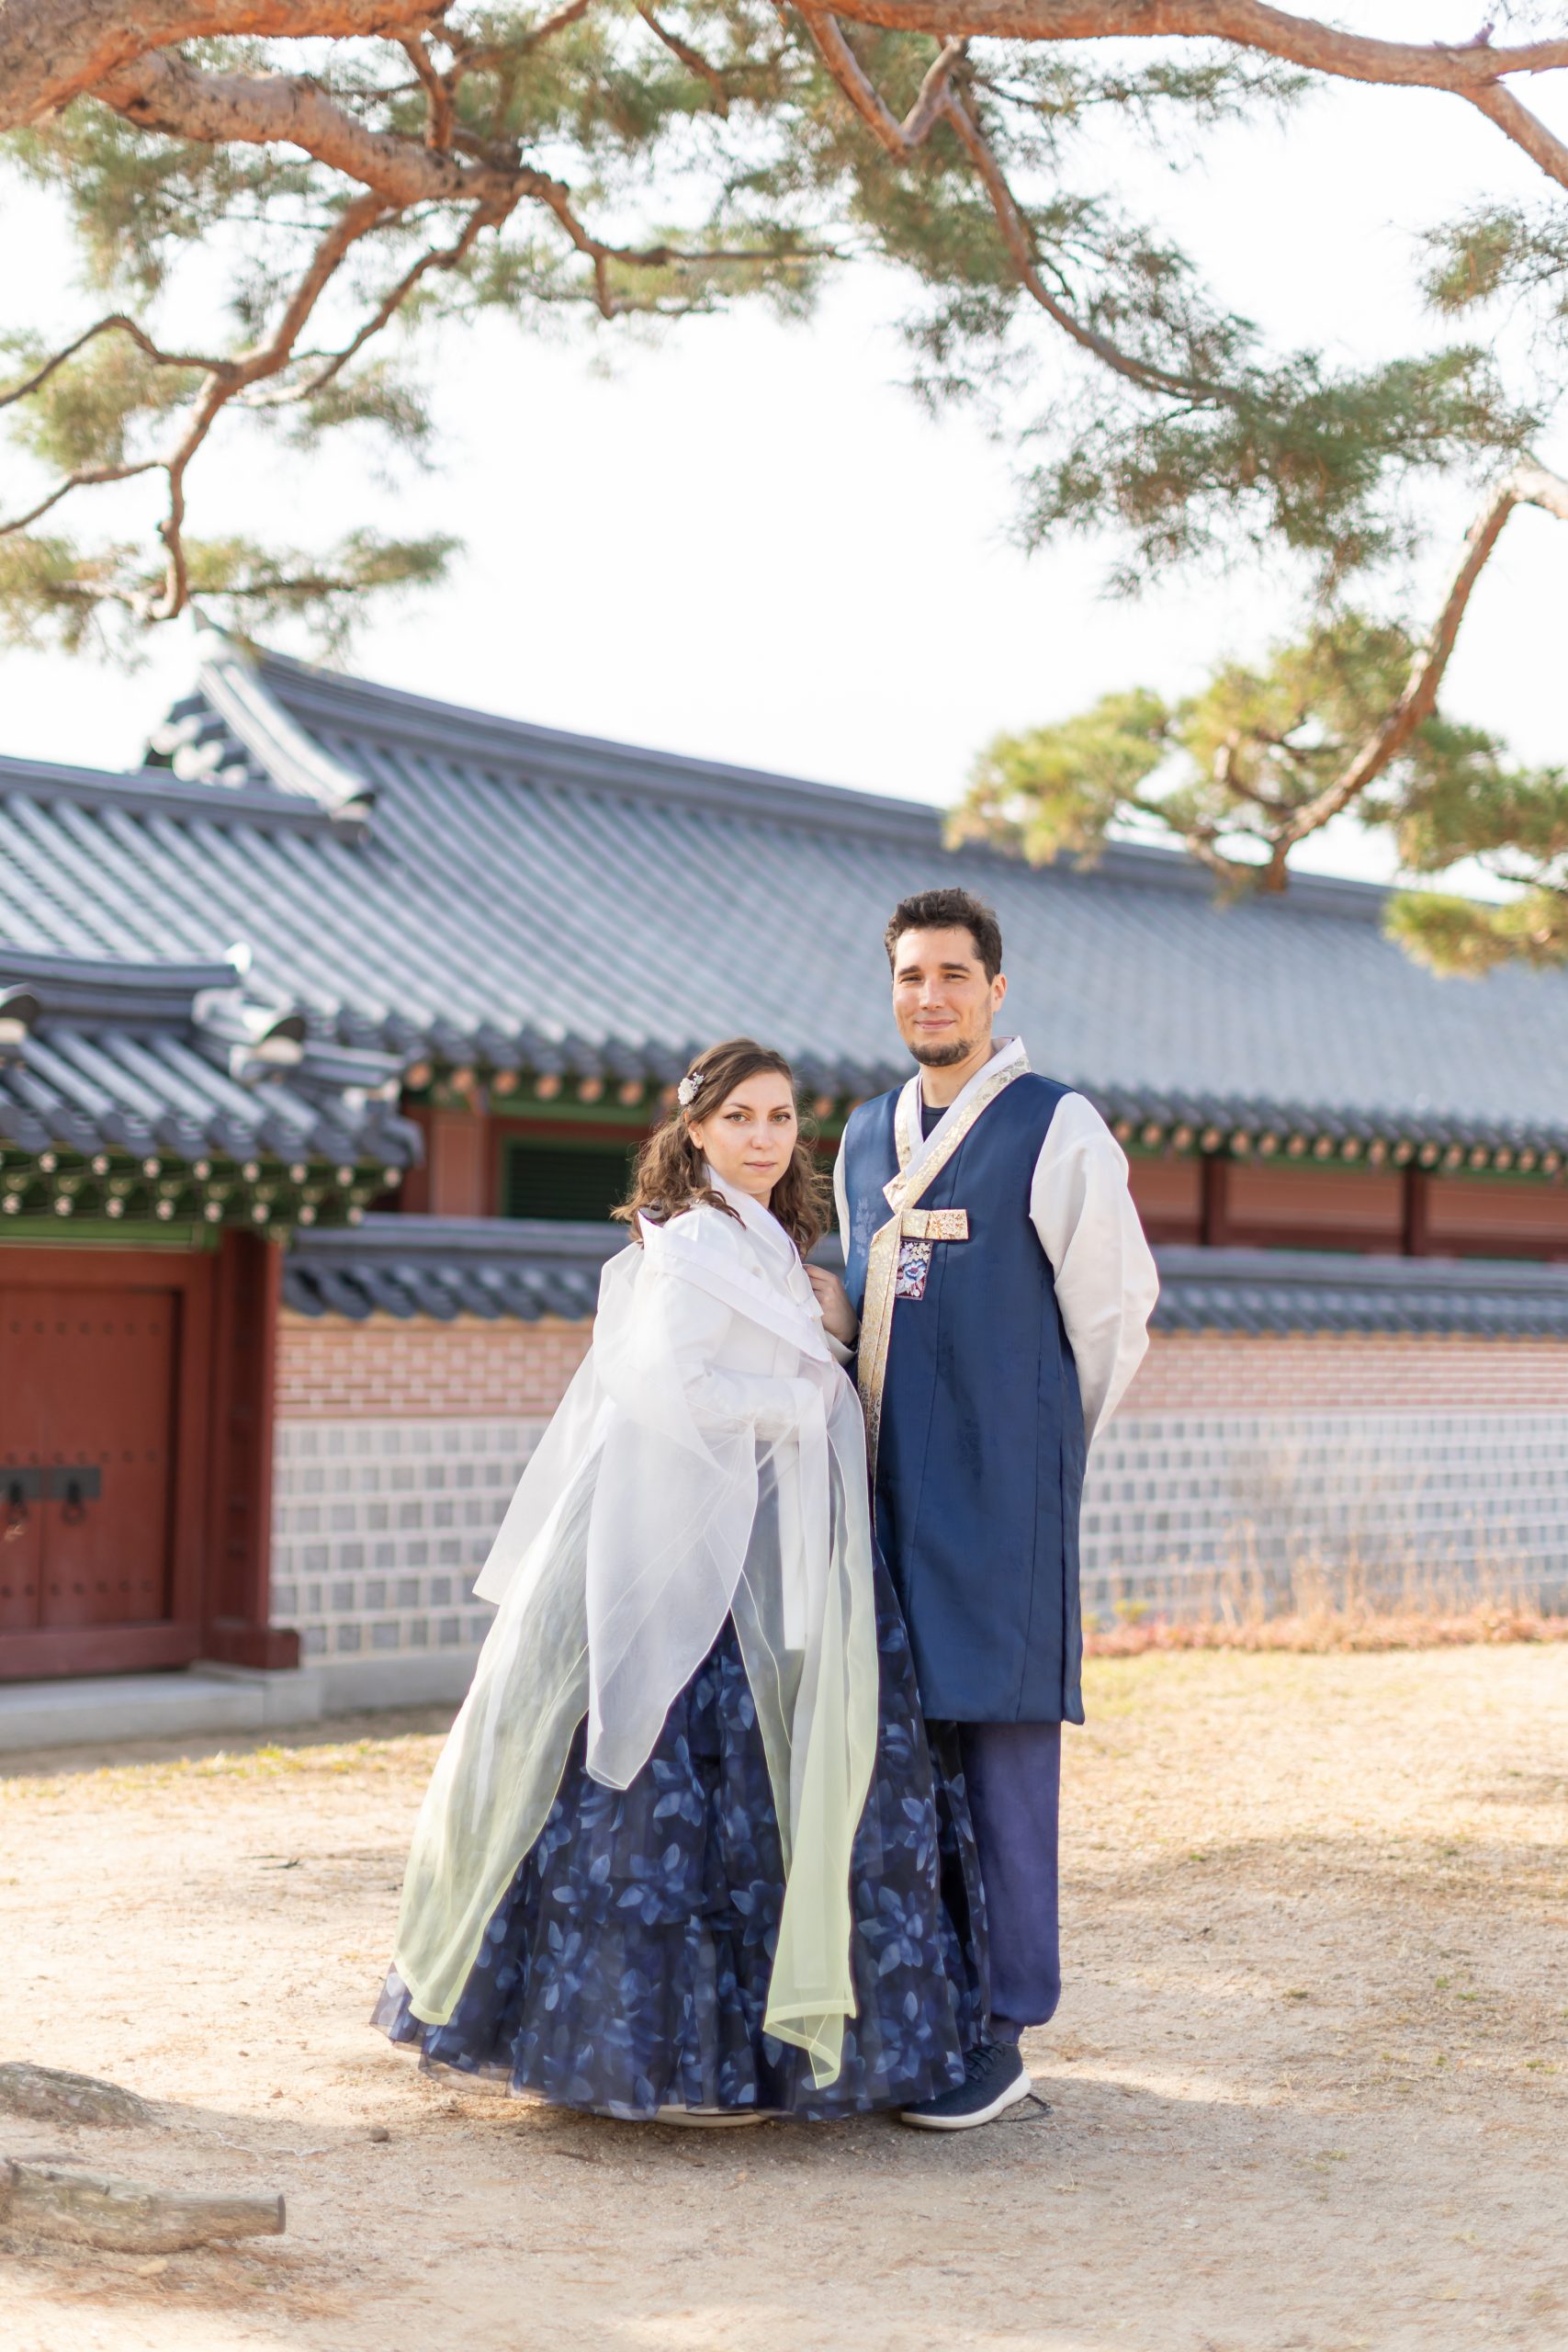 Cory and Greg from You Could Travel enjoying our Hanbok experience in Seoul